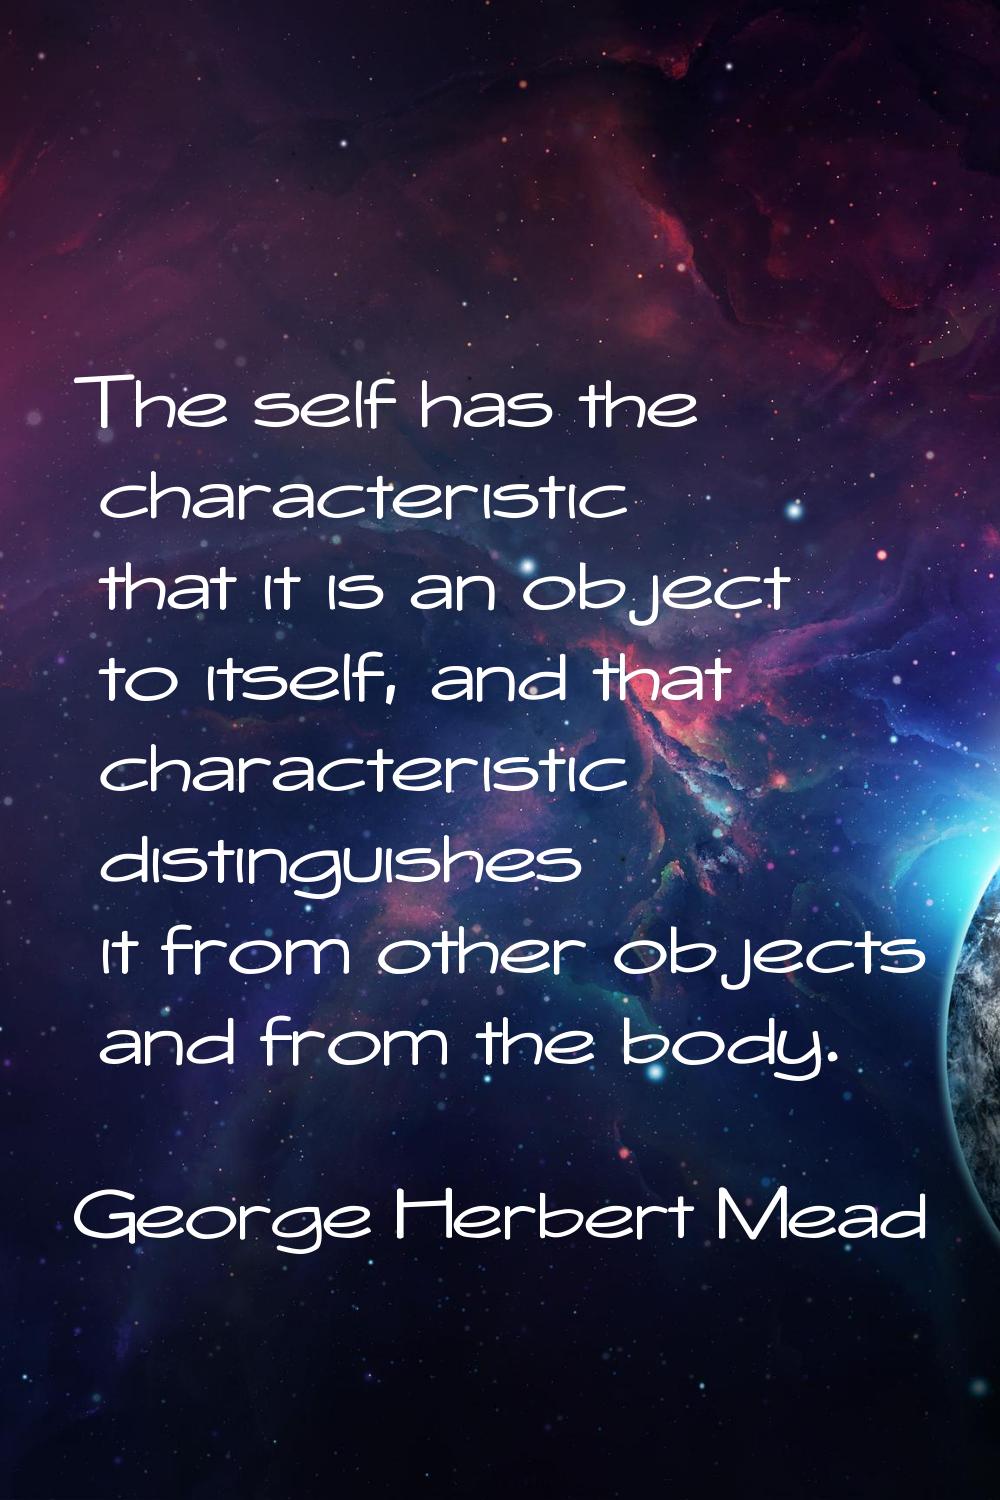 The self has the characteristic that it is an object to itself, and that characteristic distinguish